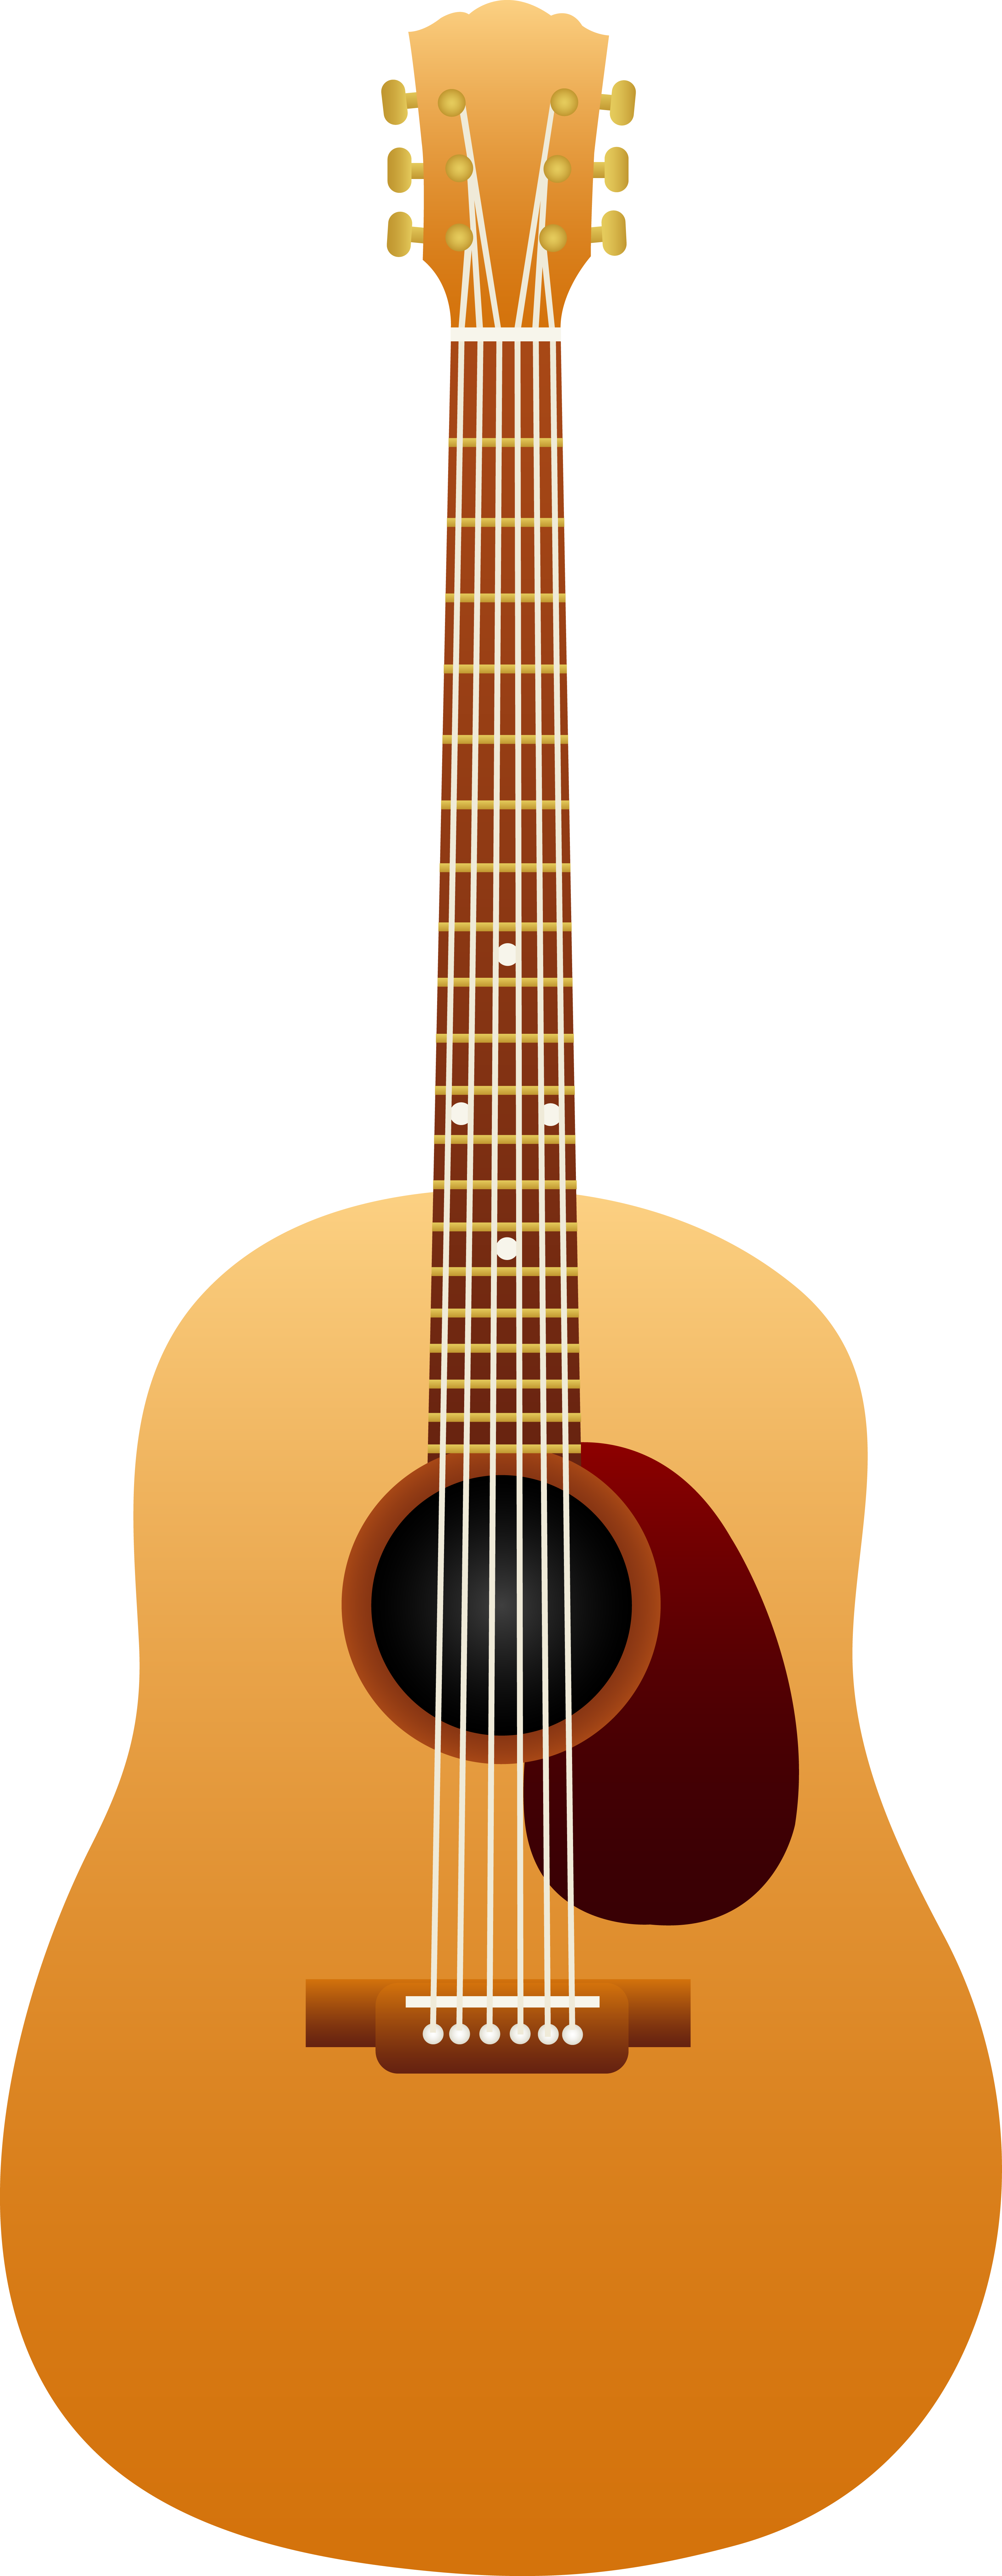 Animated guitar clipart.